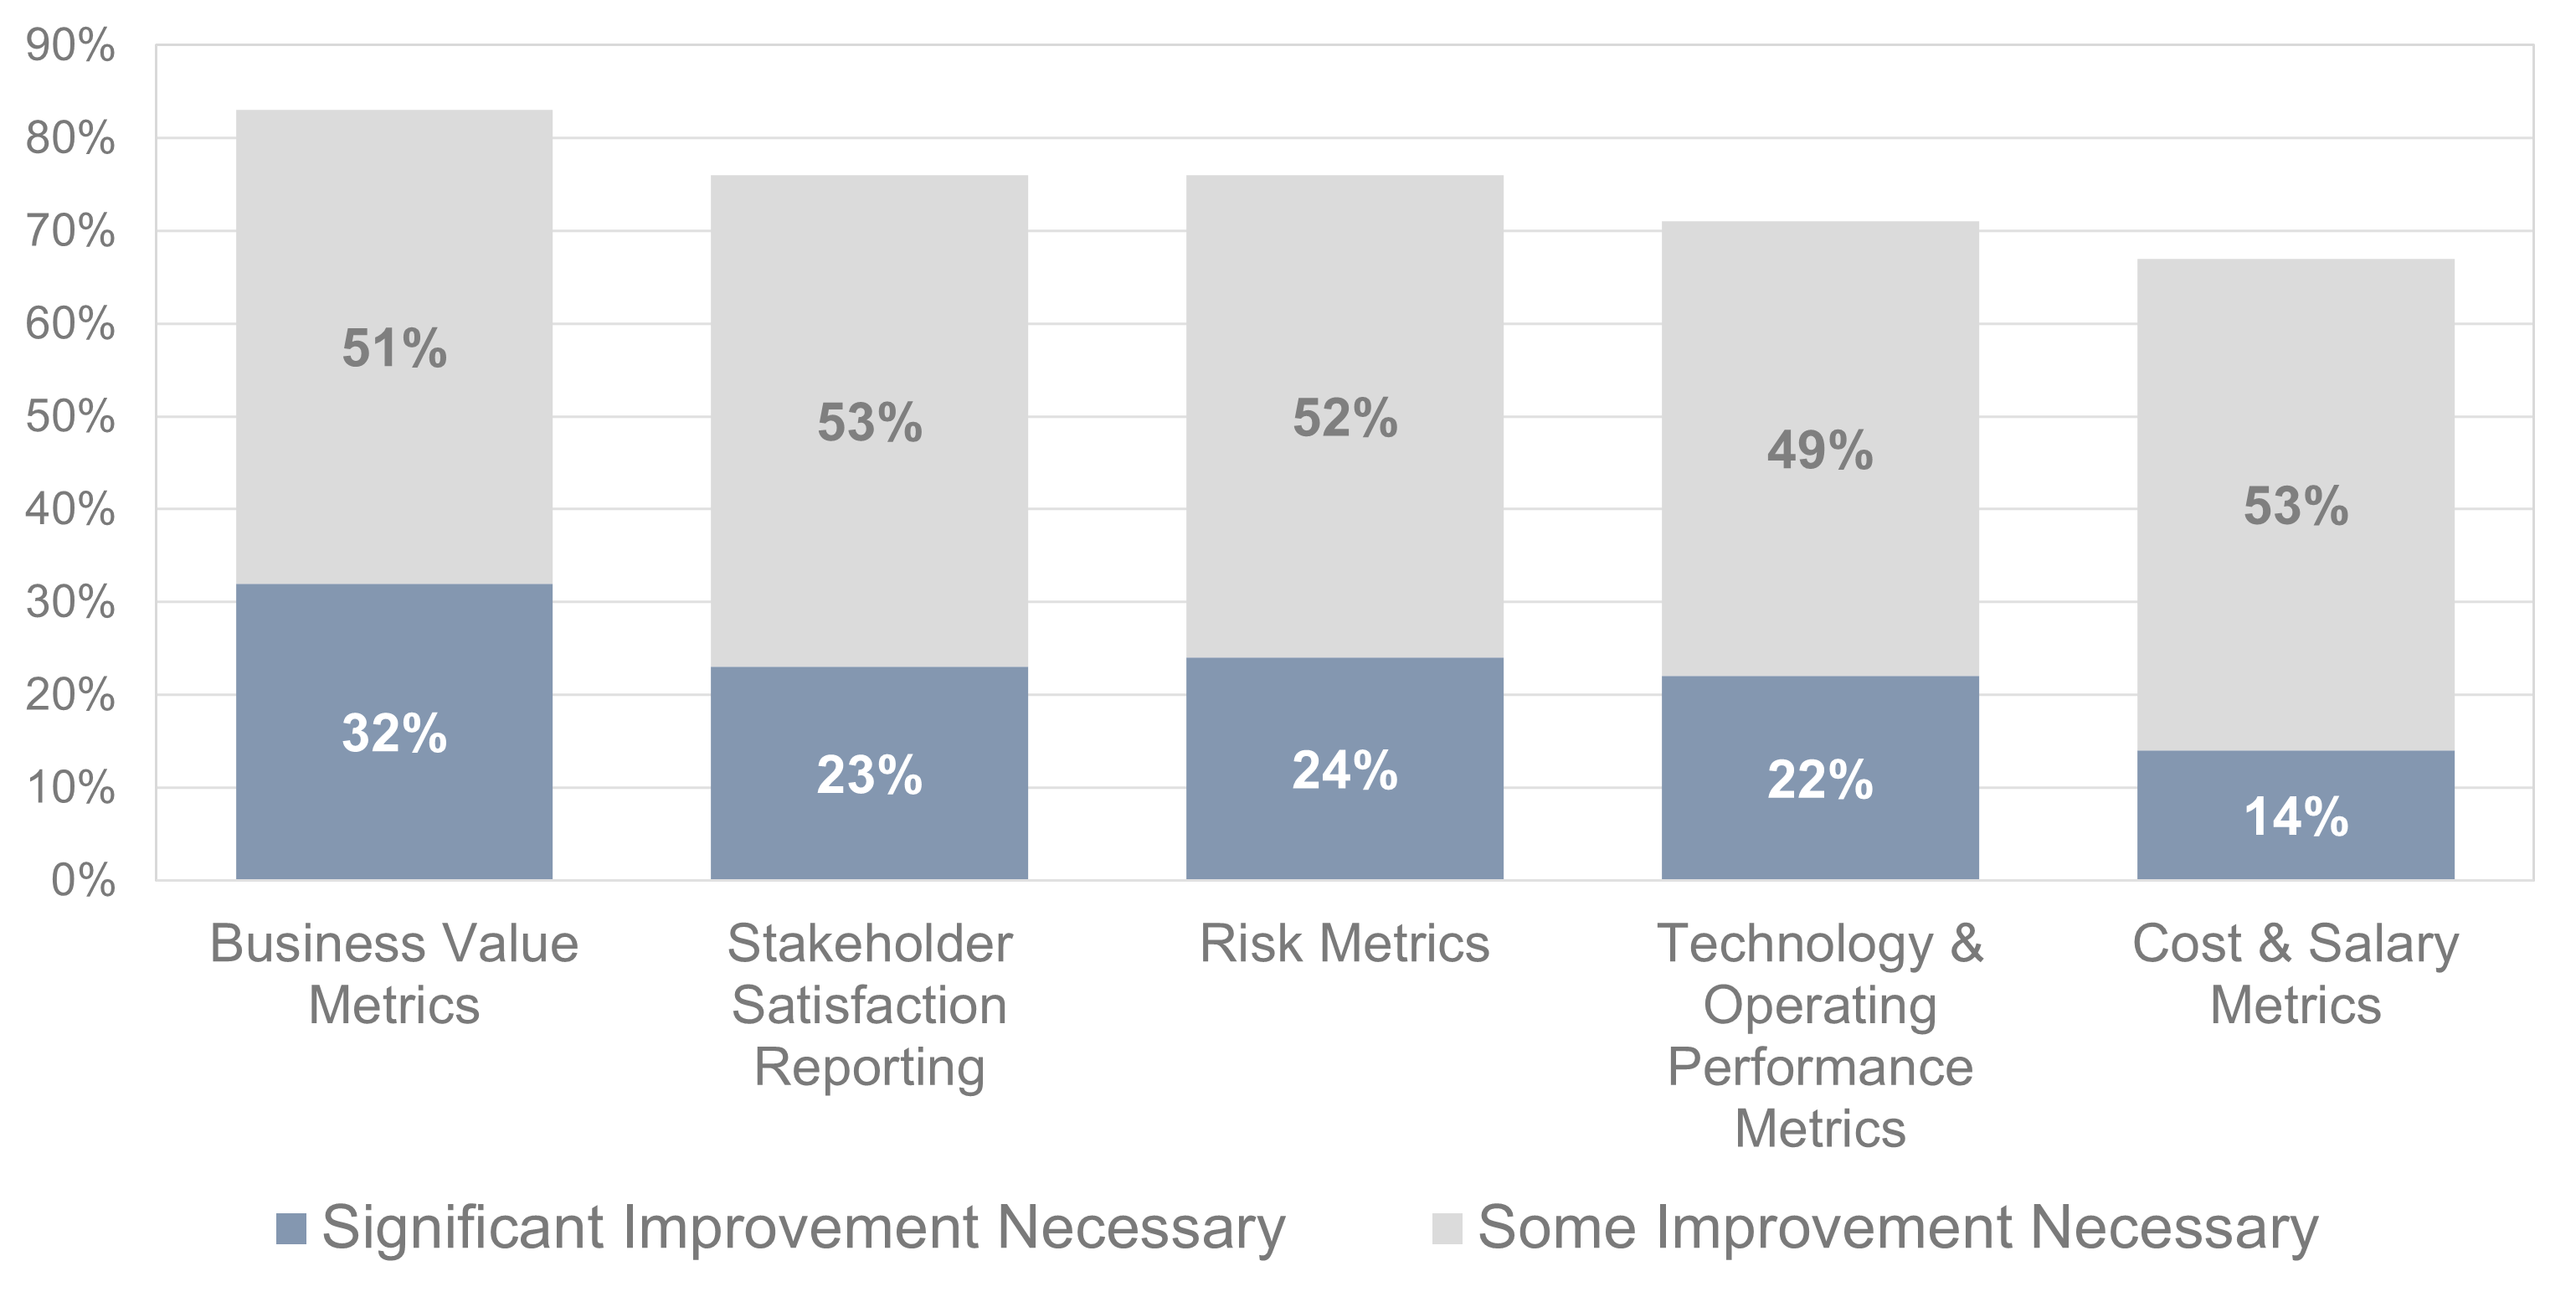 A bar graph is shown to demonstrate the CxOs importance of value. Business value metrics are 32% of significant improvement necessary, and 51% where some improvement is necessary. 